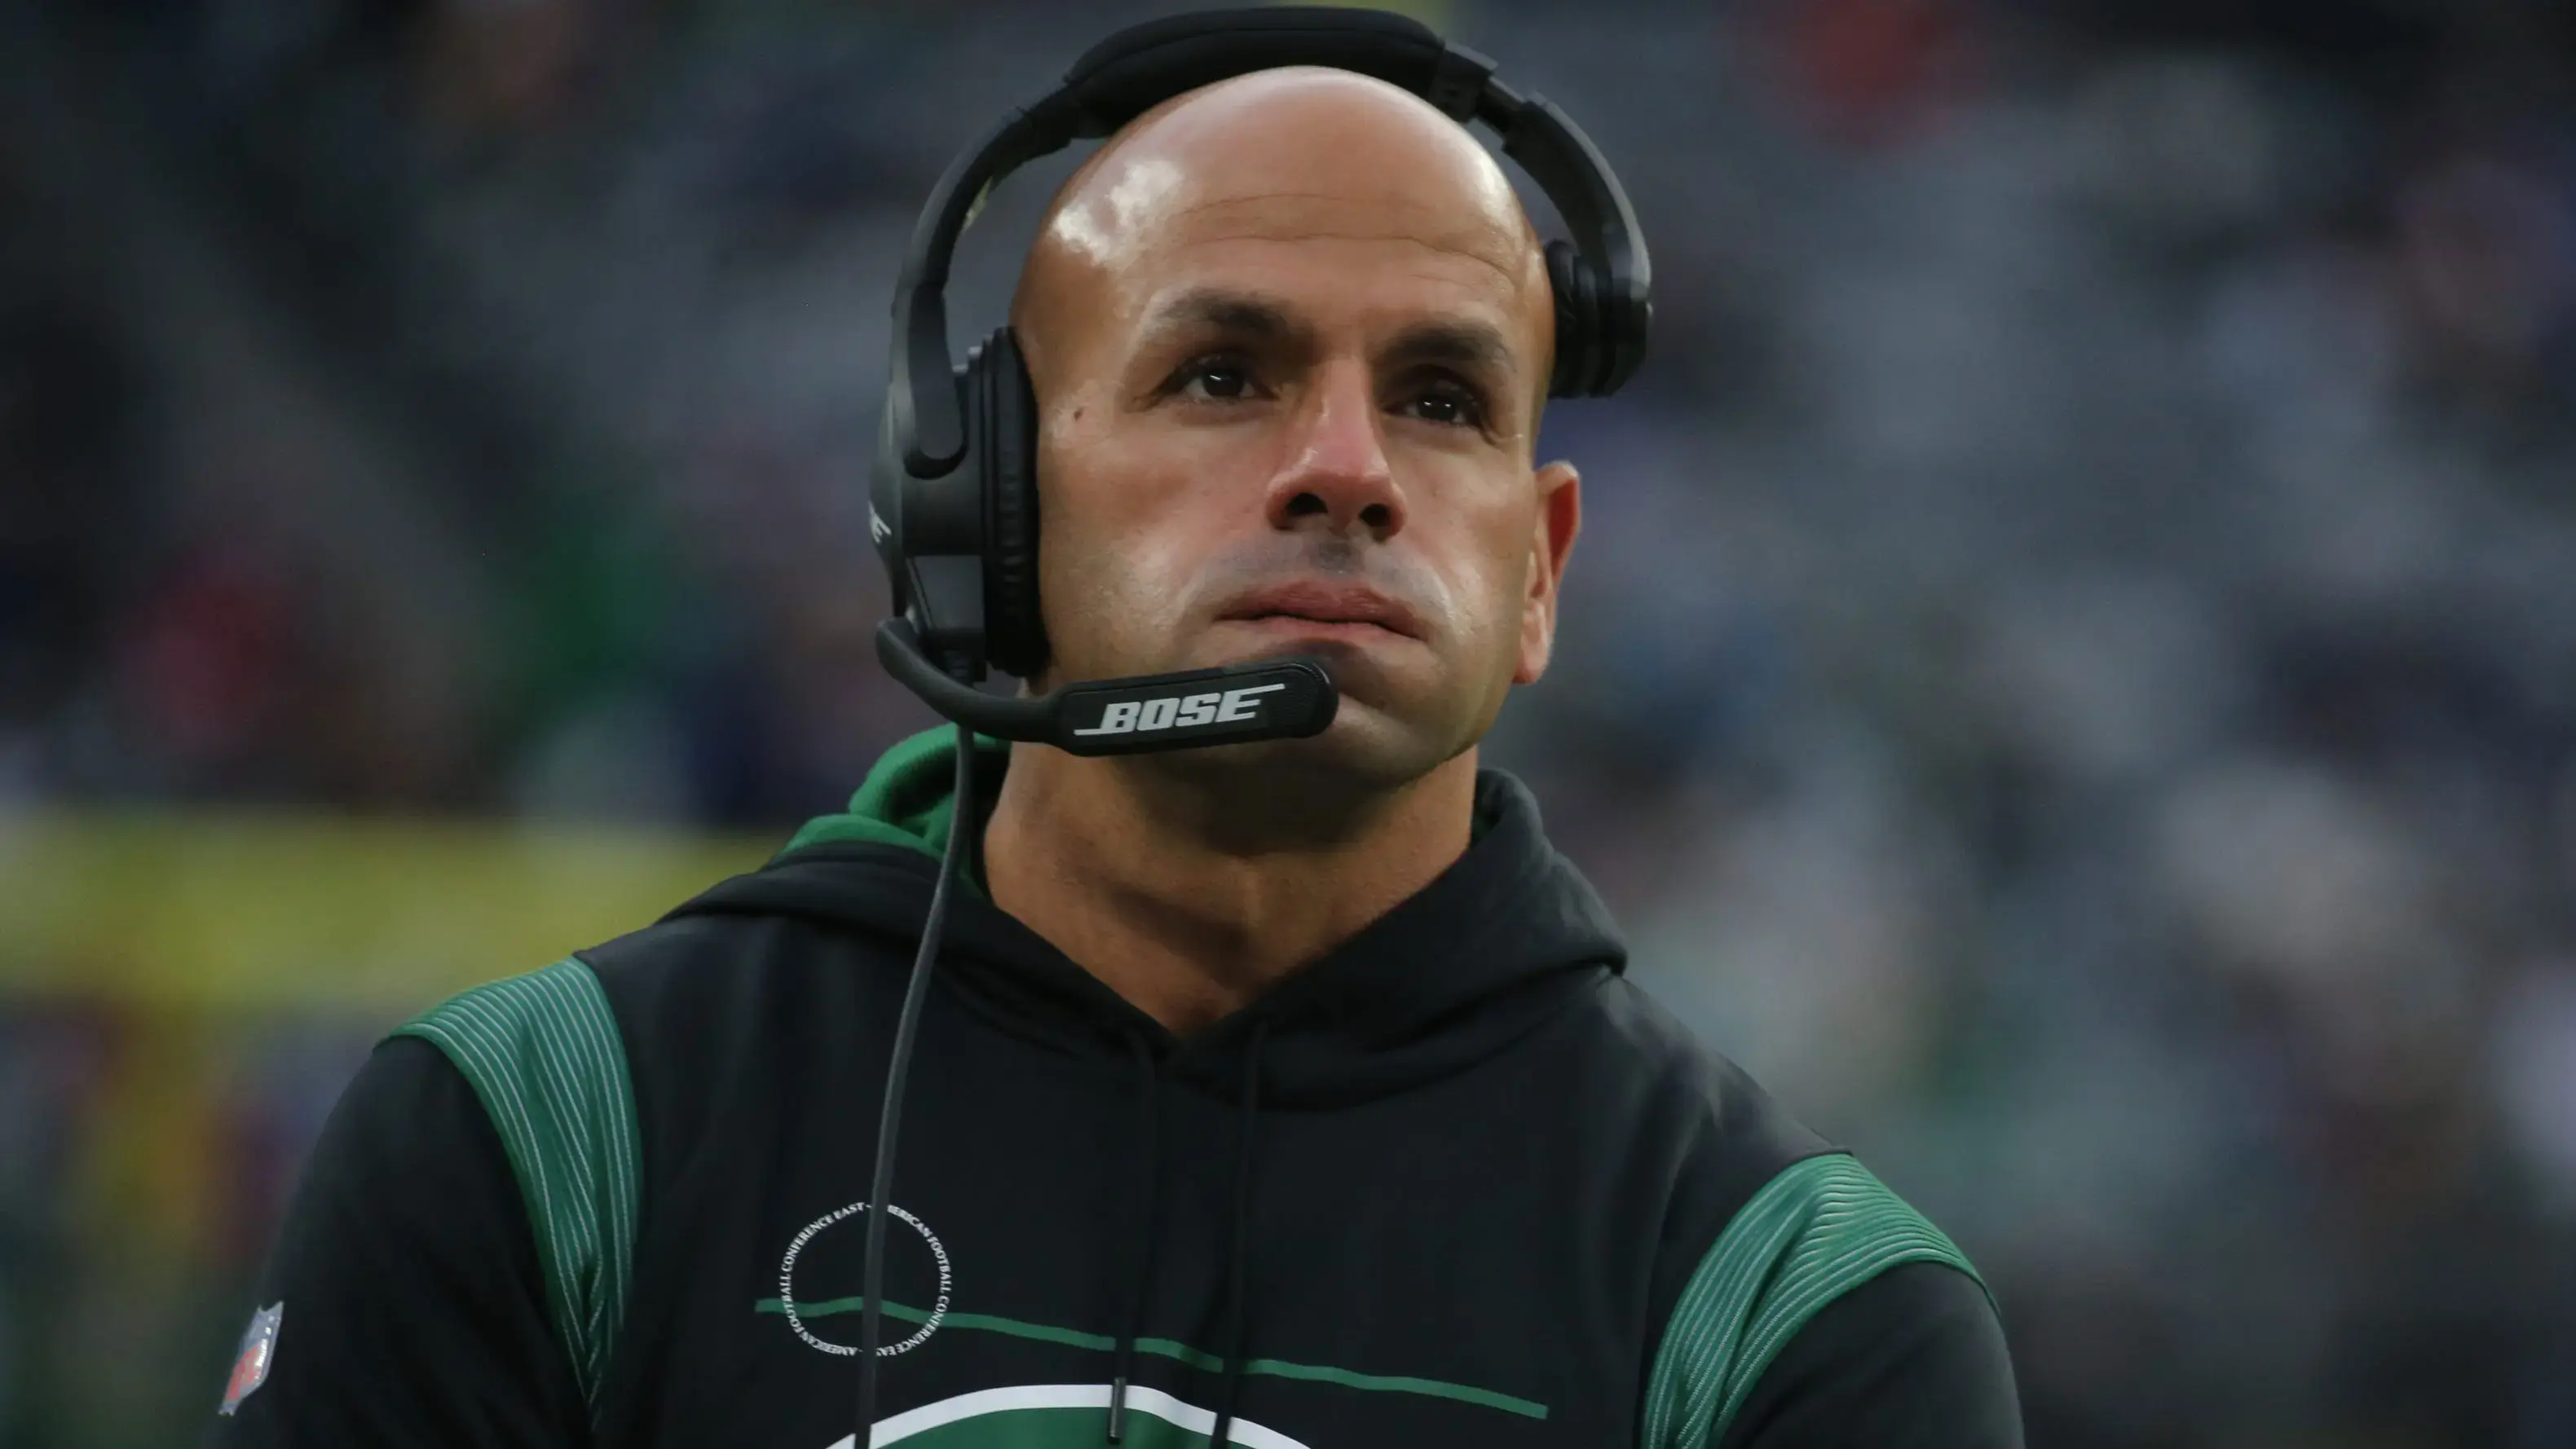 Jets head coach Robert Saleh in the second half. The Buffalo Bills beat the New York Jets 45-17 at Metlife Stadium in East Rutherford, NJ on November 14, 2021. The Buffalo Bills Play The New York Jets At Metlife Stadium In East Rutherford Nj On November 14 2021 / Chris Pedota, NorthJersey.com / USA TODAY NETWORK